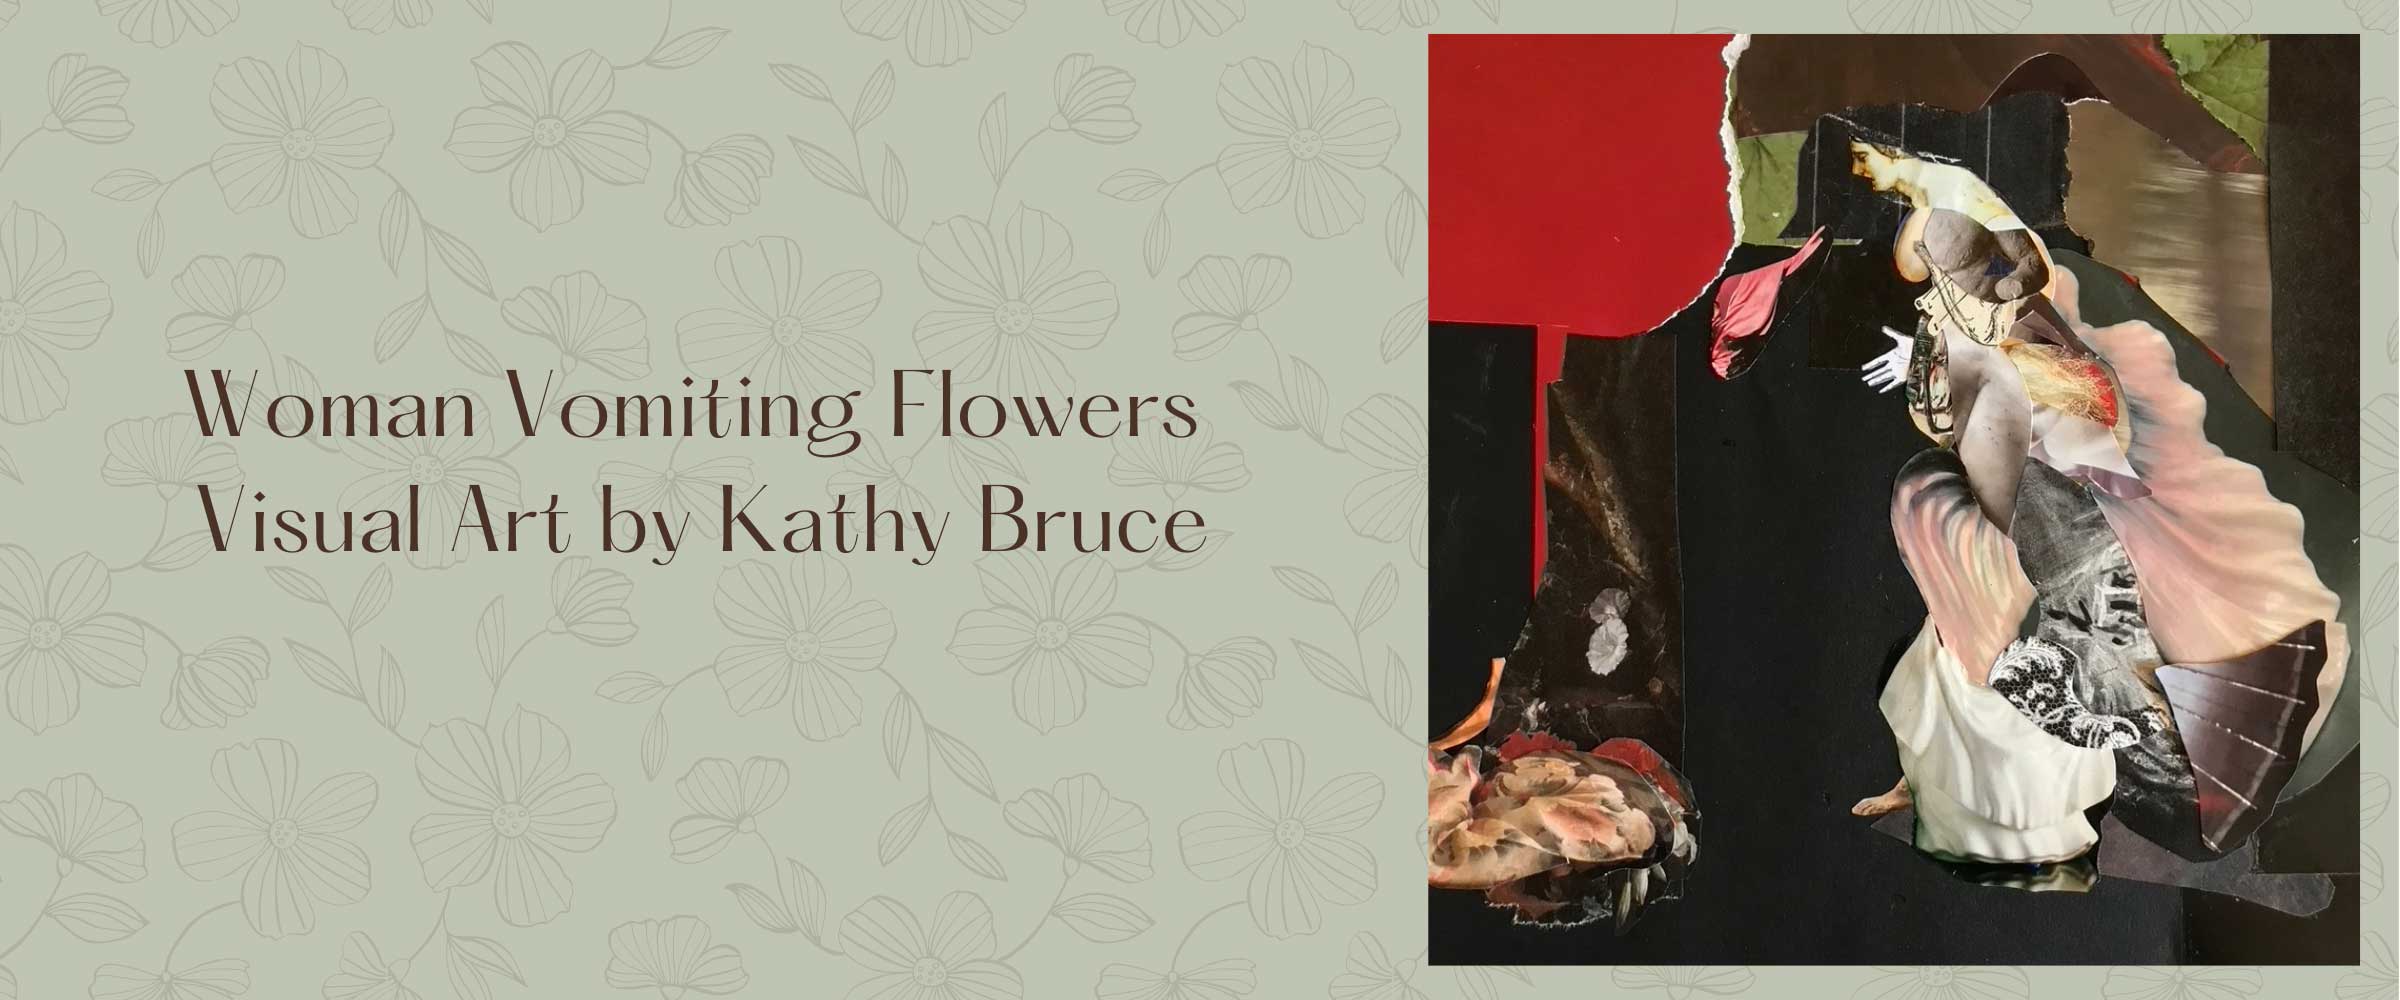 Woman Vomiting Flowers - Visual Art by Kathy Bruce